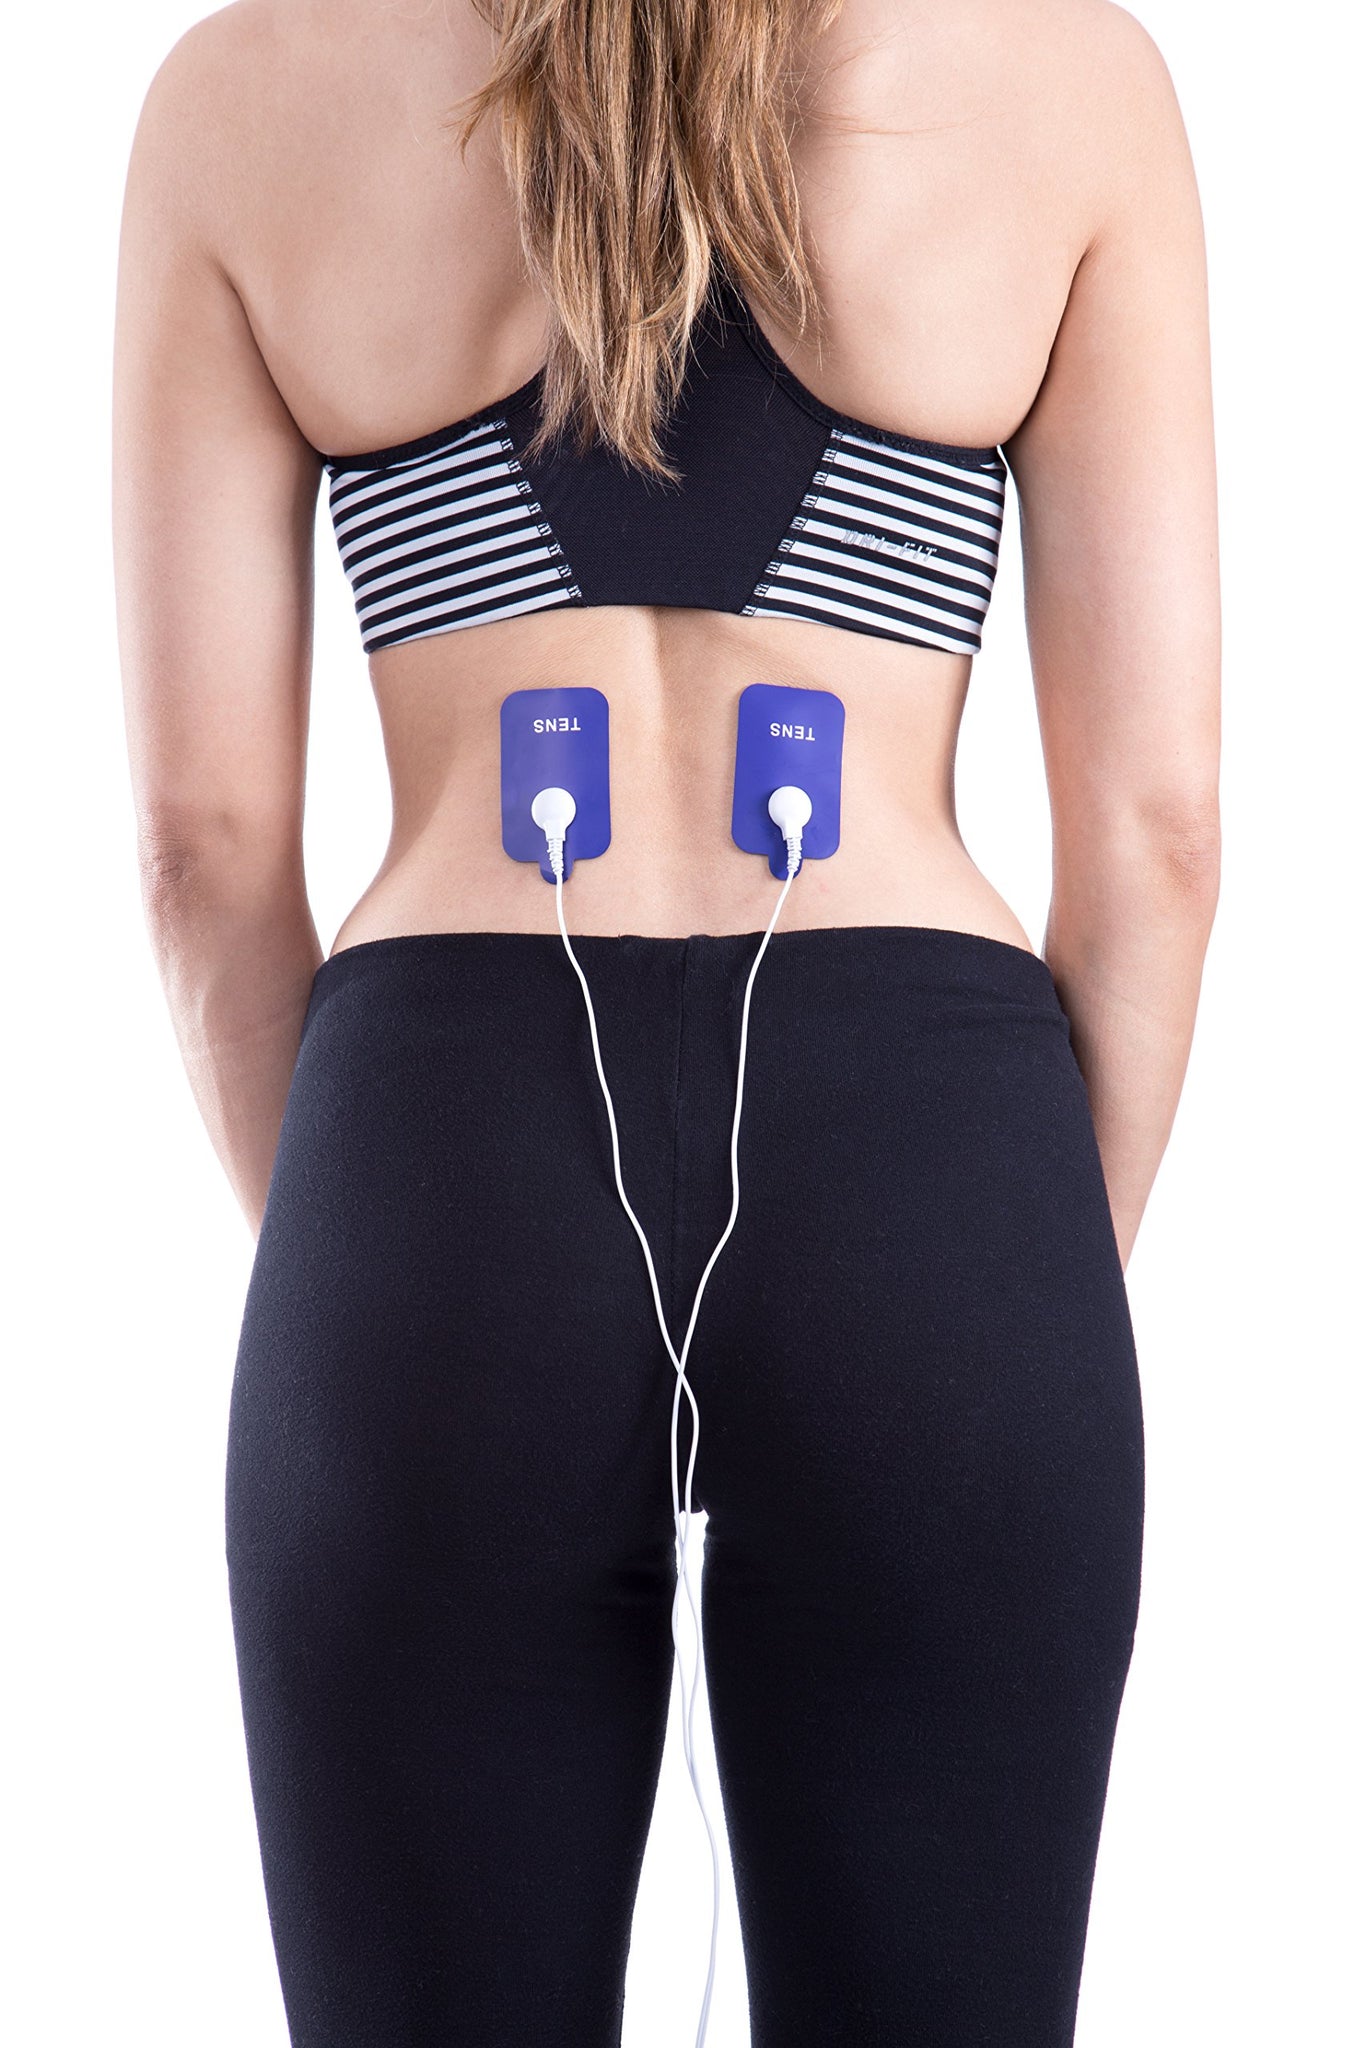 EMS - Electrical Muscle Stimulation